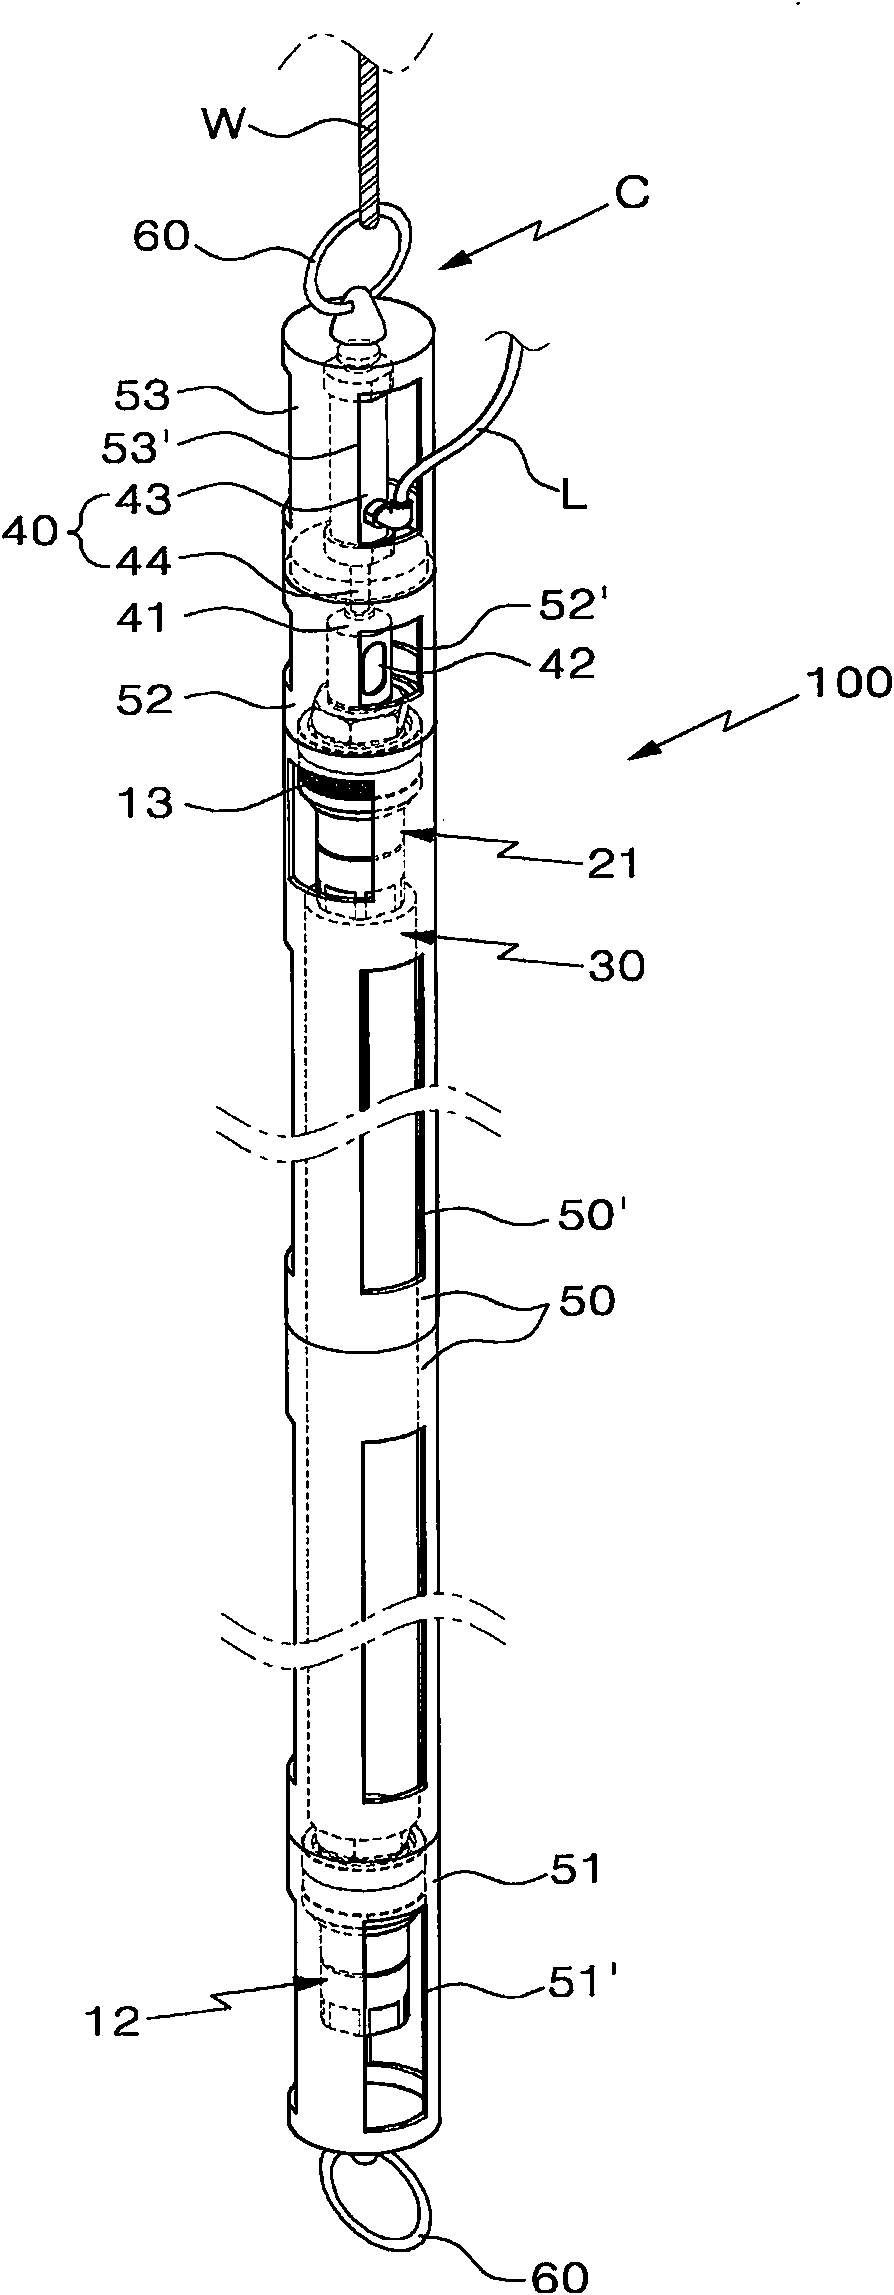 Apparatus and method for groundwater sampling using hydraulic couplers